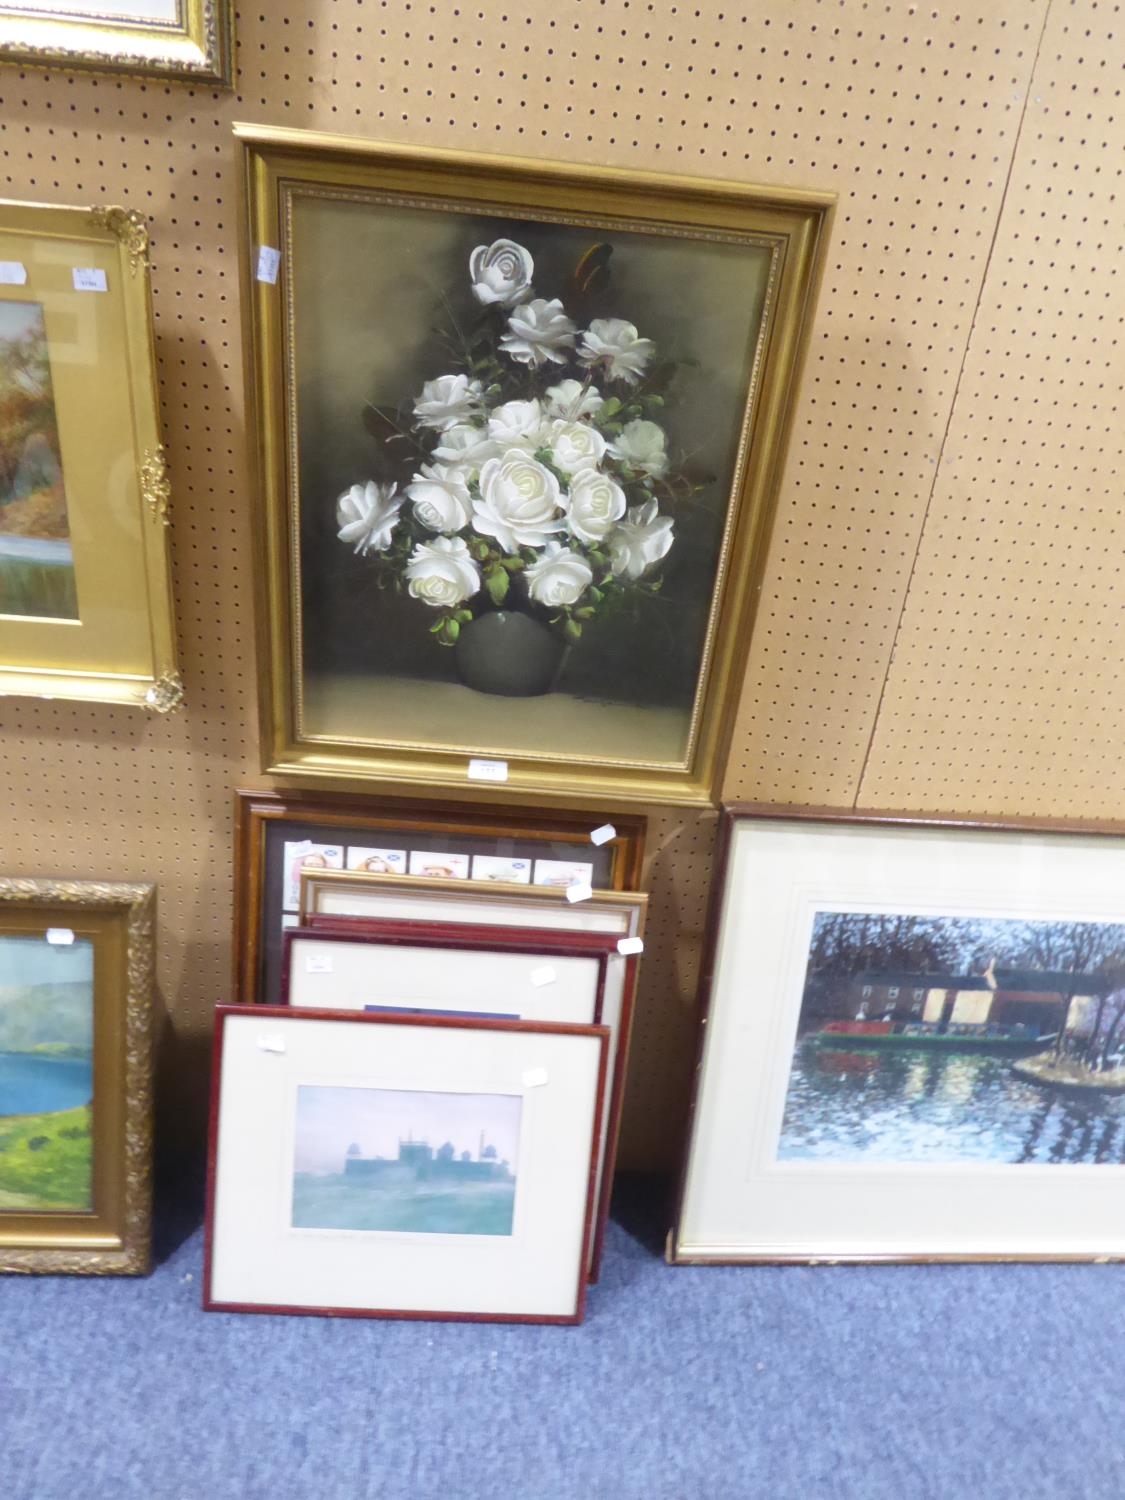 MODERN STUDIO OIL PAINTING OF FLOWERS; A FRAMED SET OF OPEN GOLF CHAMPIONS CARDS, A JUDY BOYES